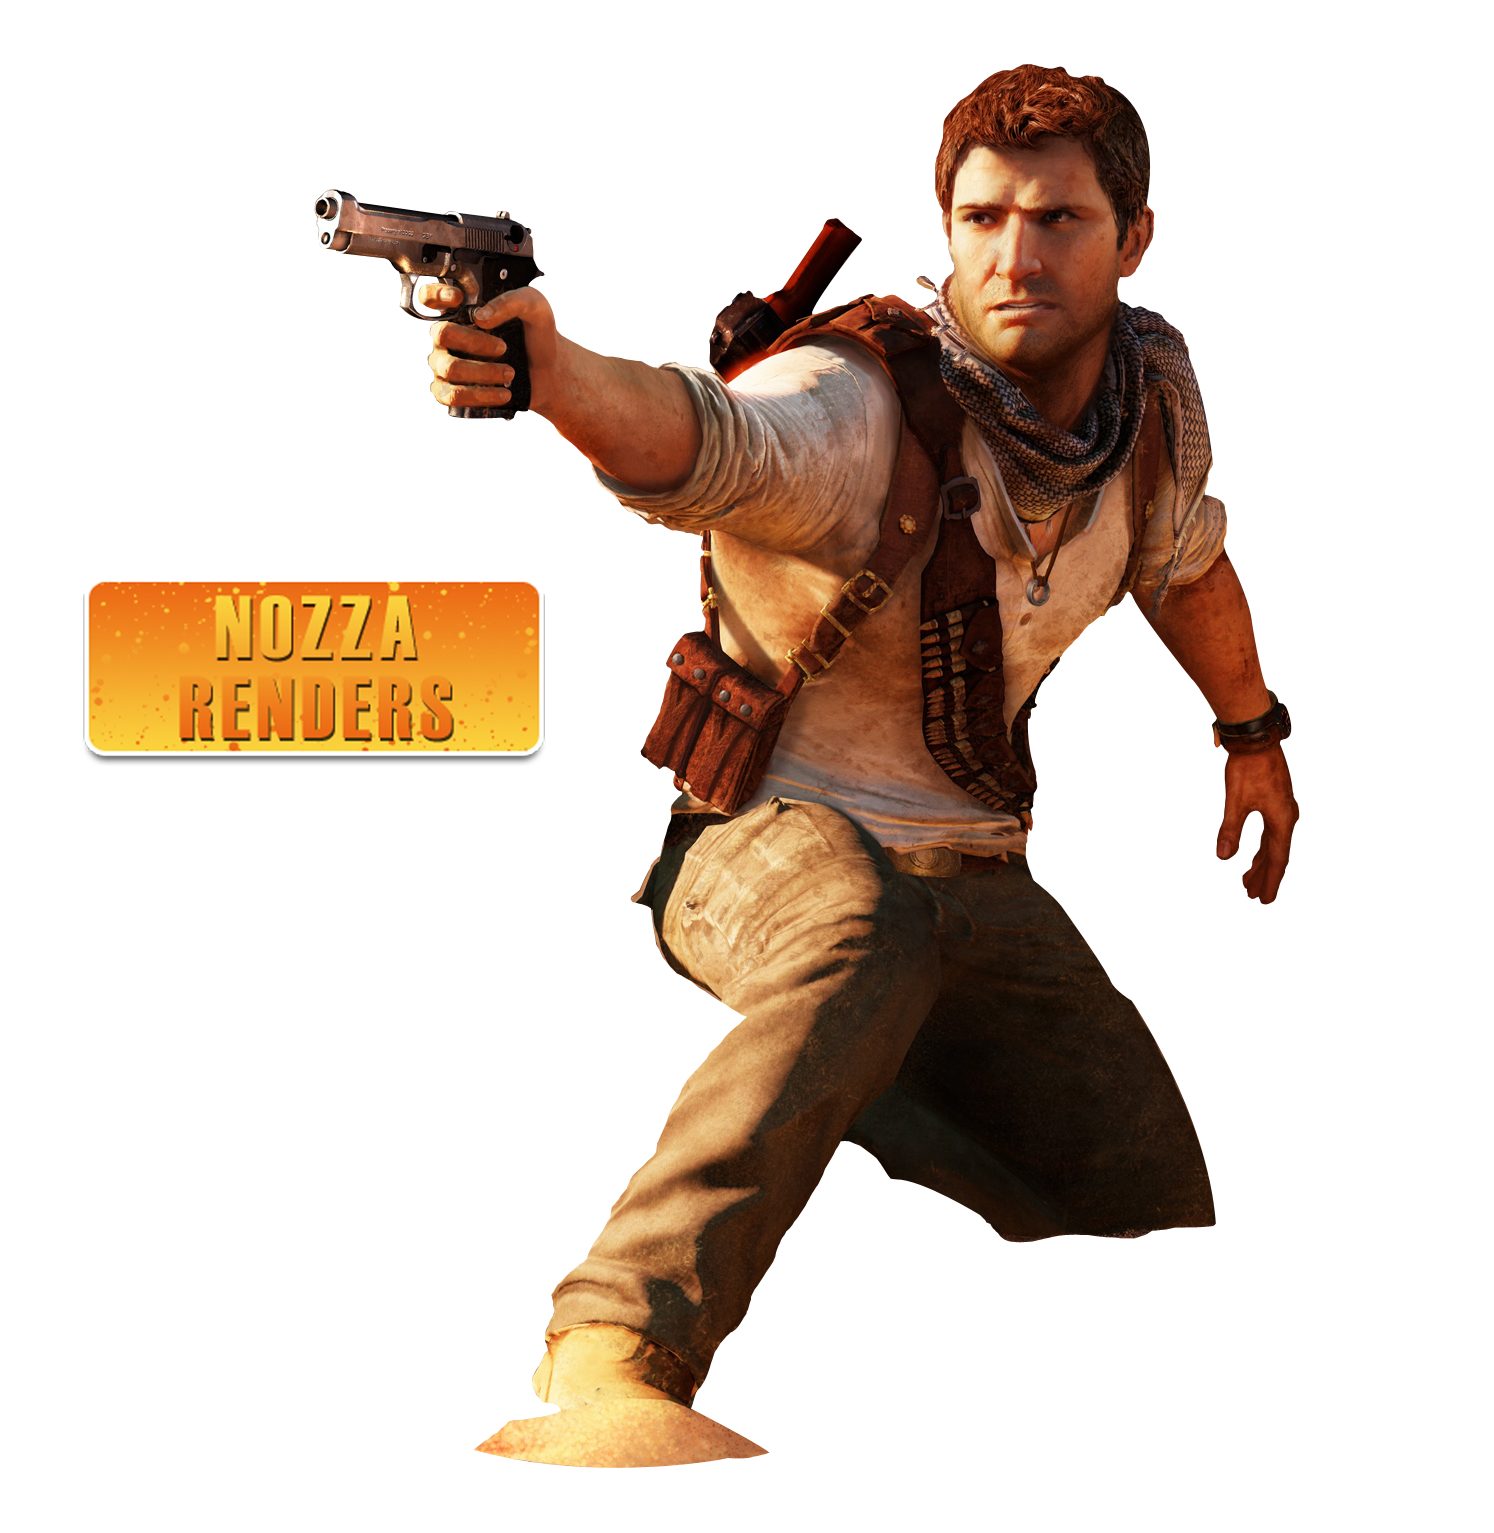 Uncharted Transparent PNG